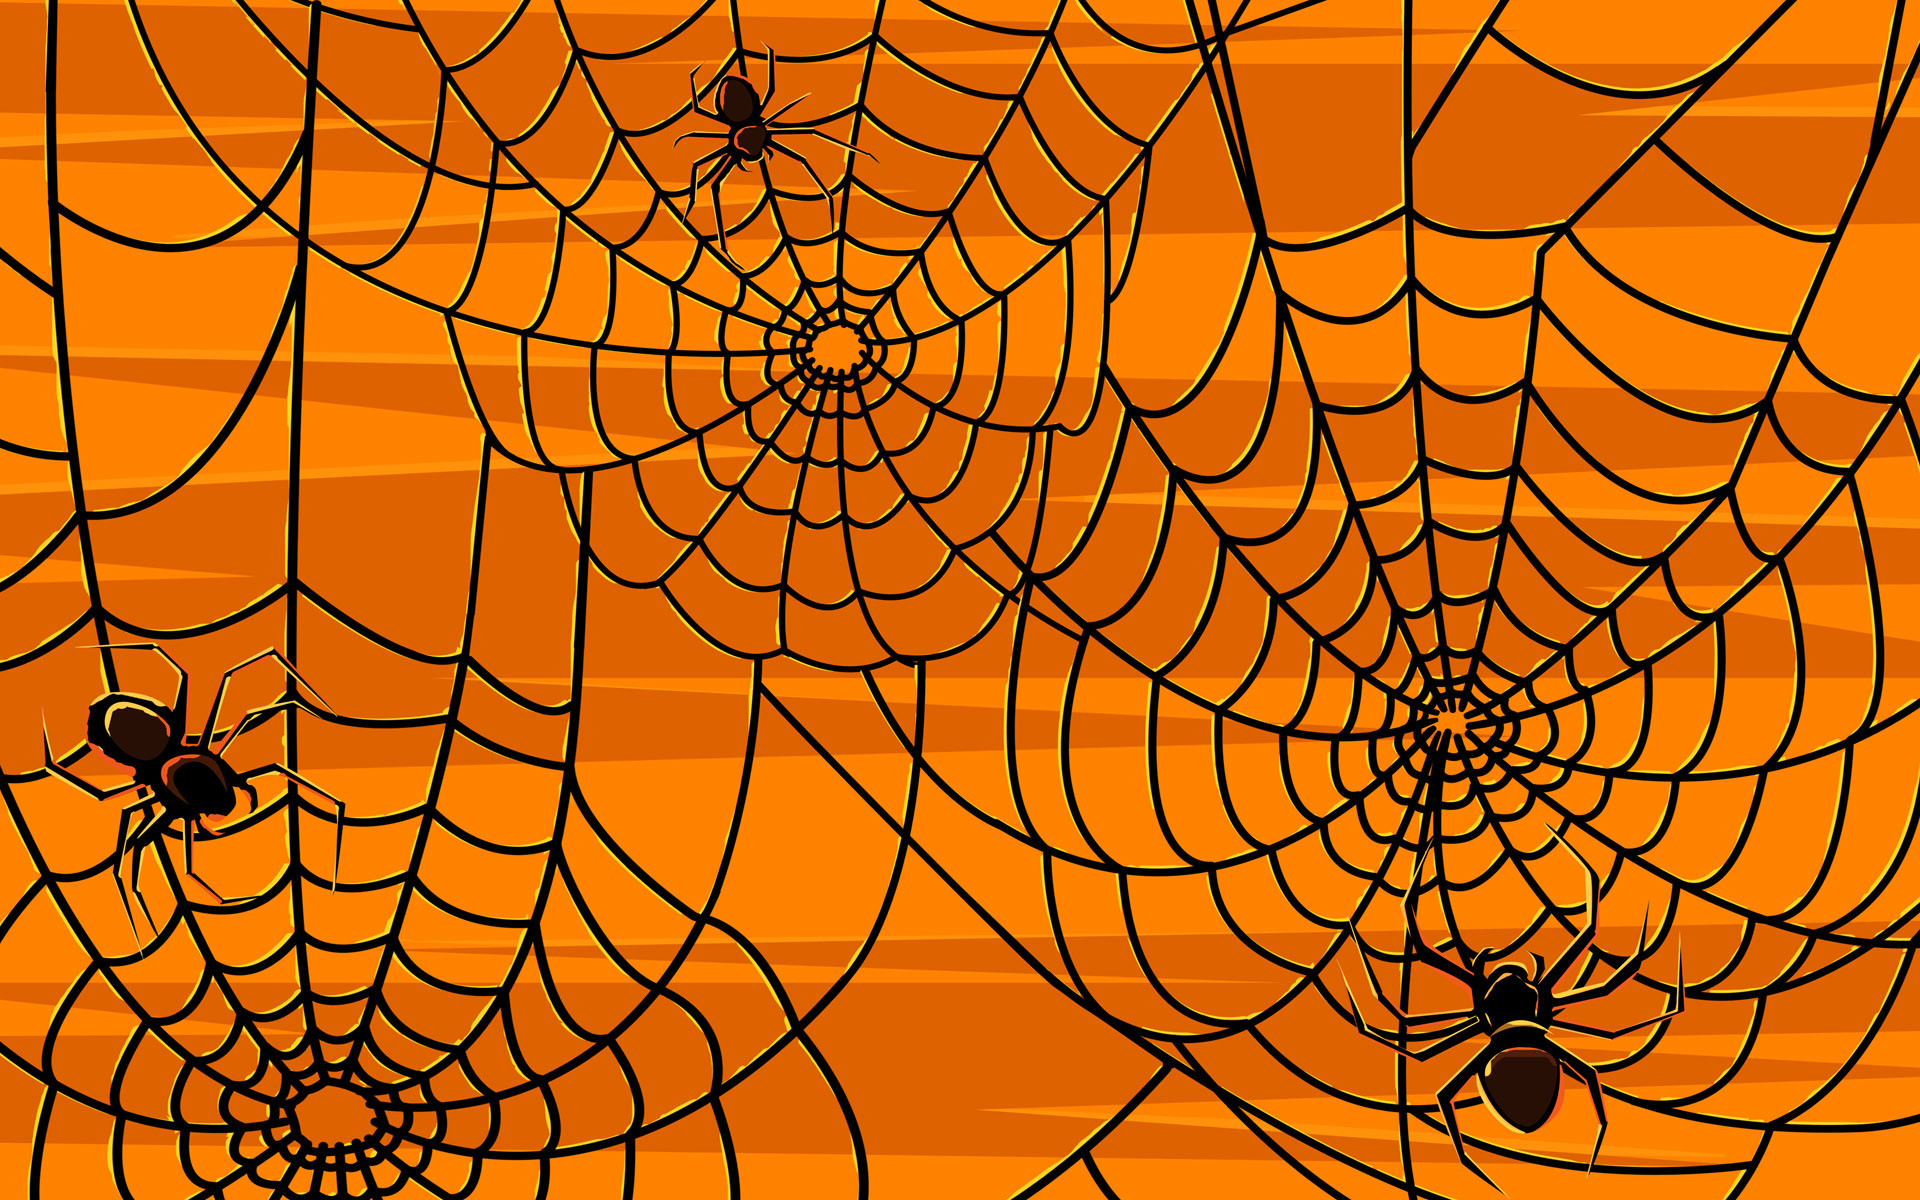 1920x1200 45 Scary Halloween 2012 HD Wallpapers | Pumpkins, Witches, Spider Web .